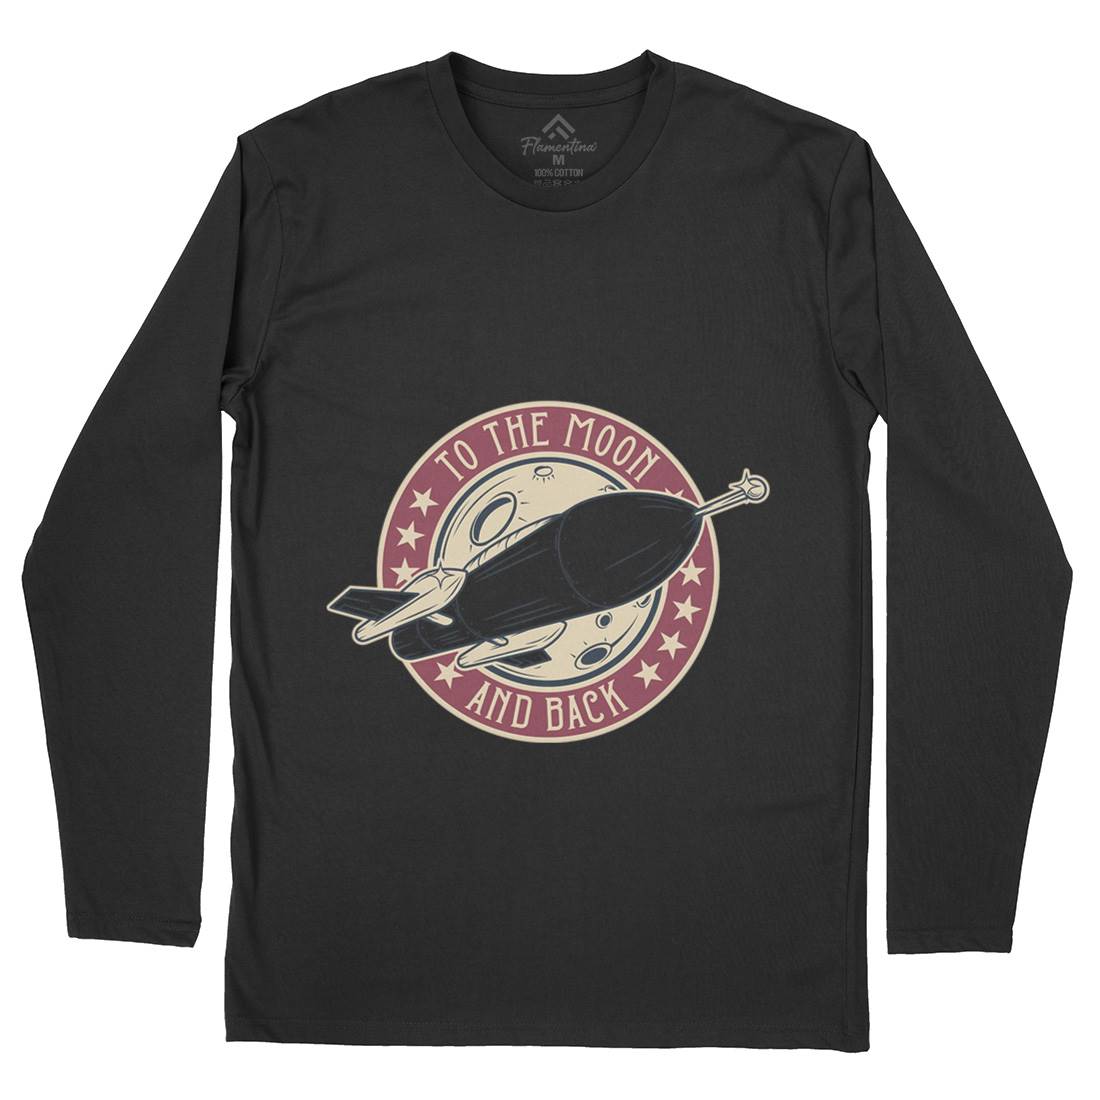 To The Moon Mens Long Sleeve T-Shirt Space D993